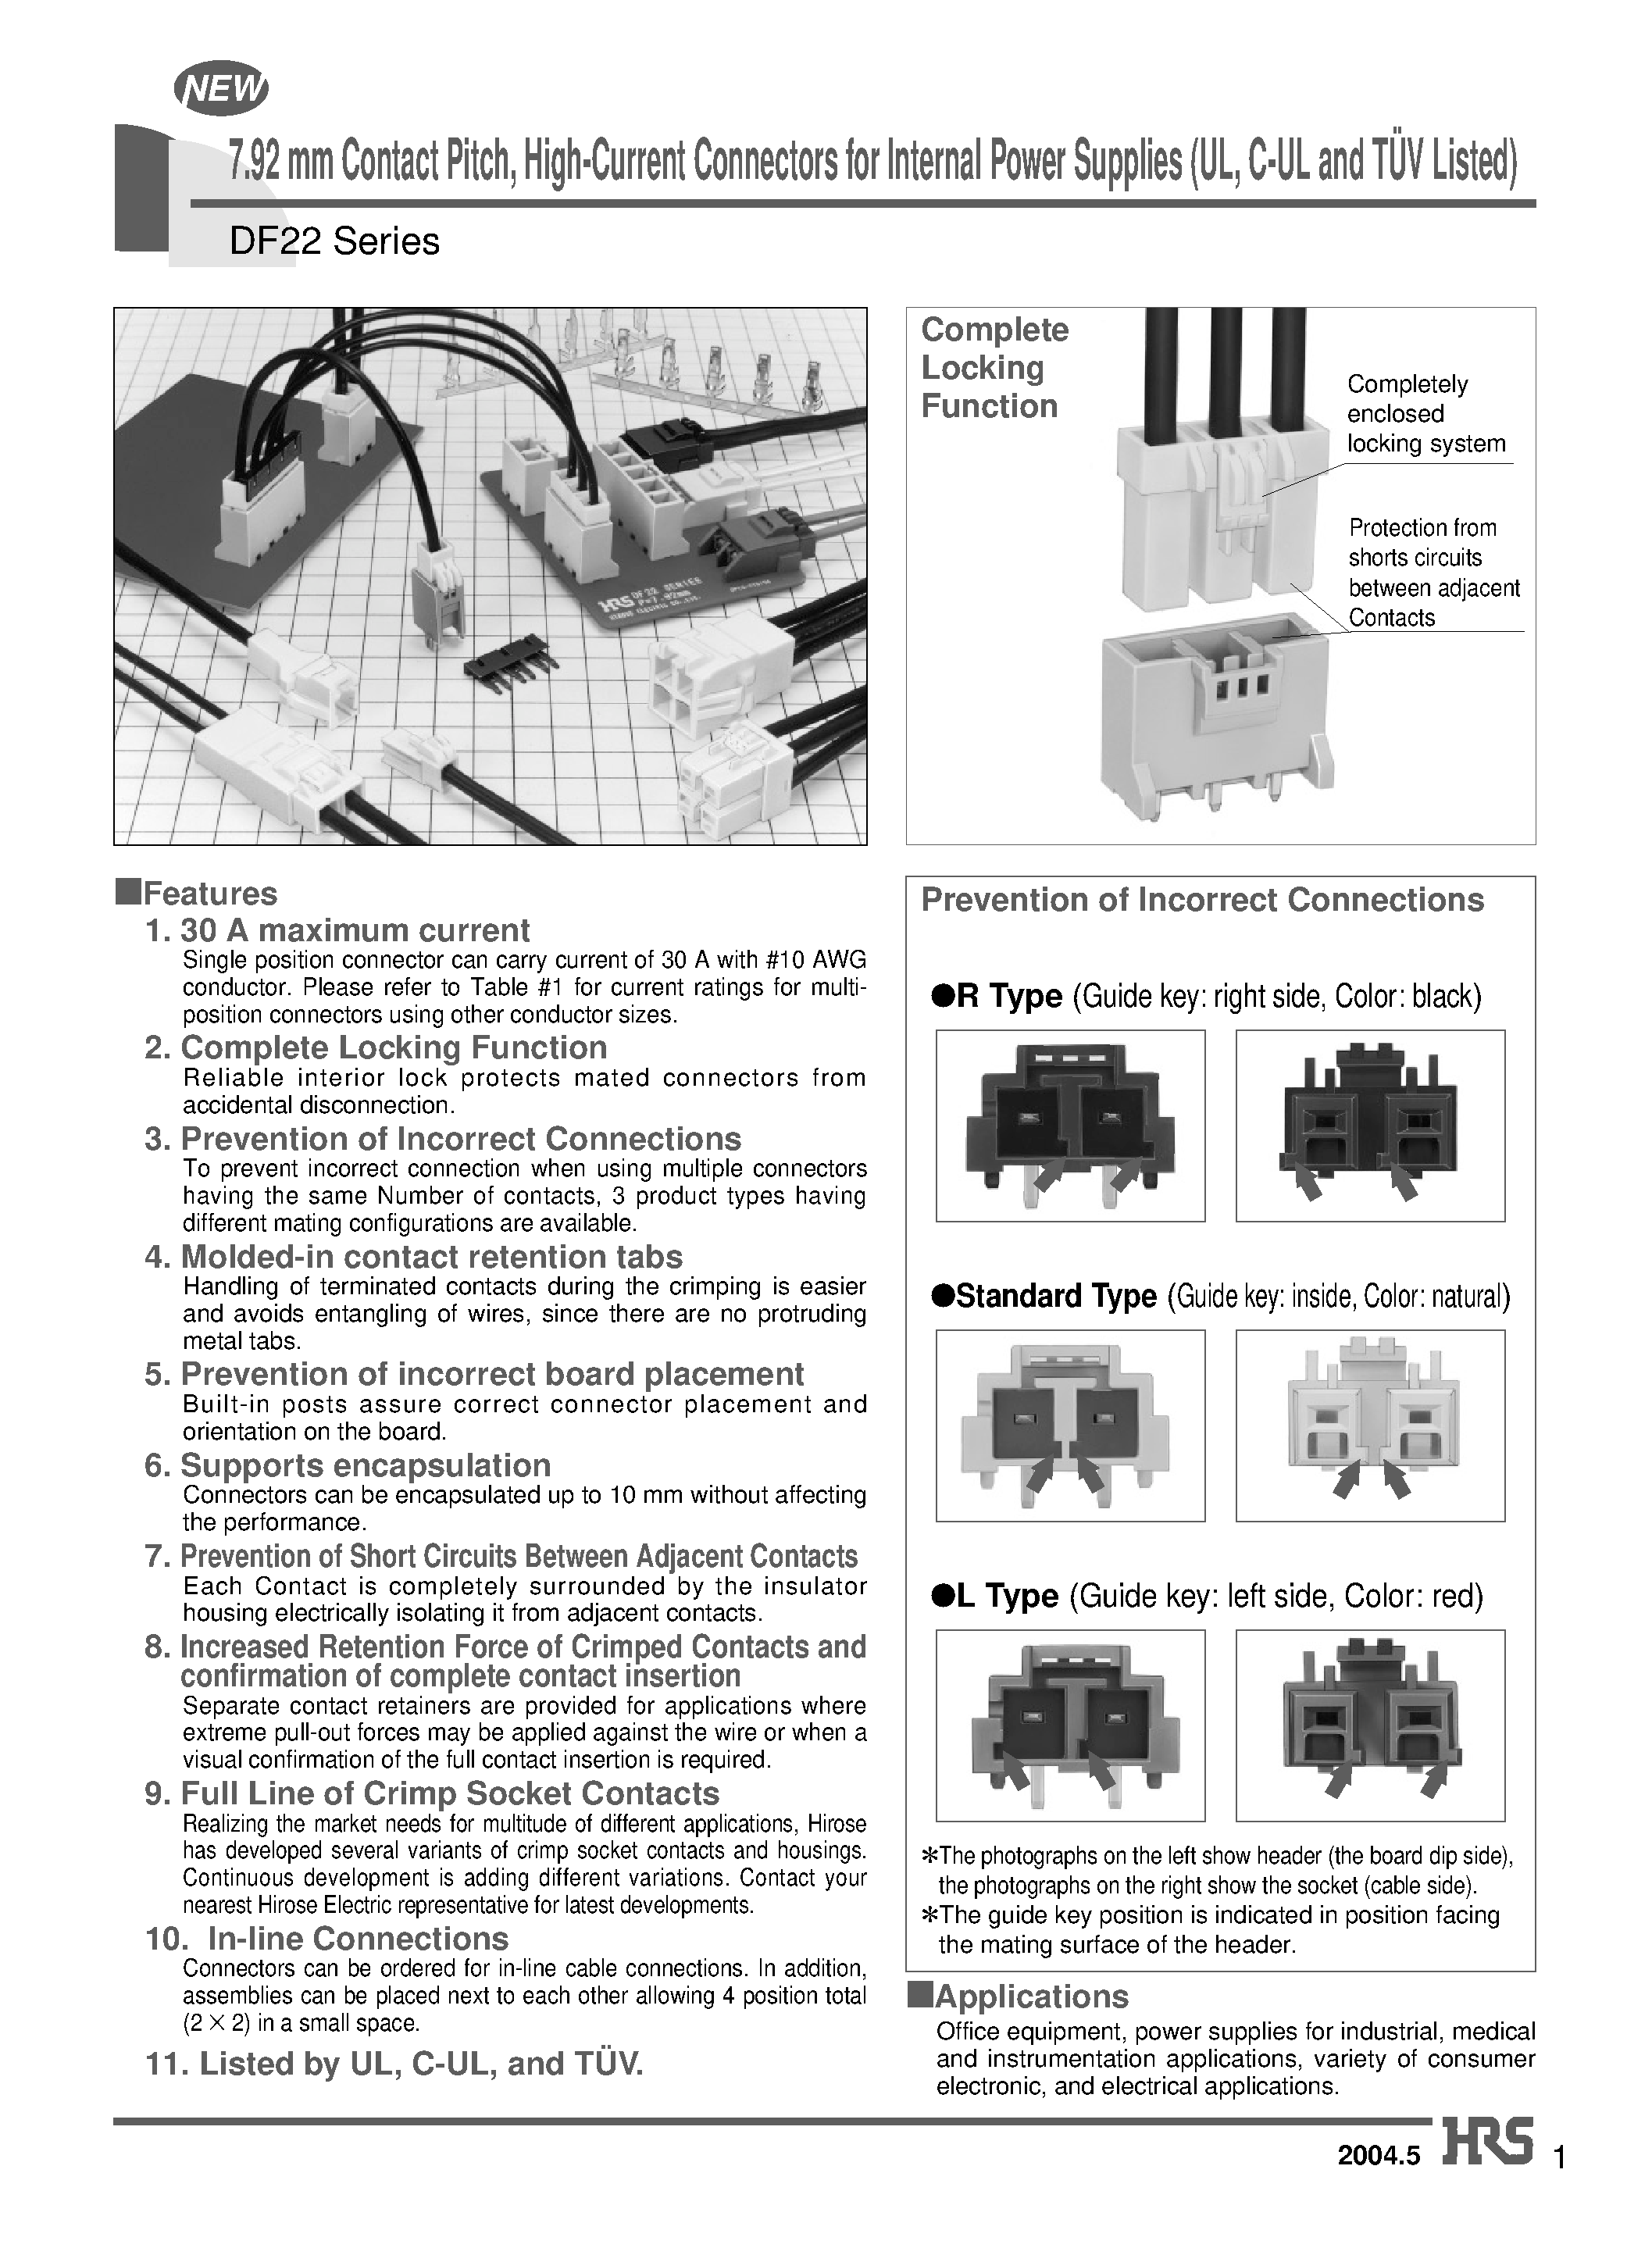 Datasheet DF22A-4P-7.92DSA - 7.92 mm Contact Pitch/ High-Current Connectors for Internal Power Supplies (UL/ C-UL and TUV Listed) page 1